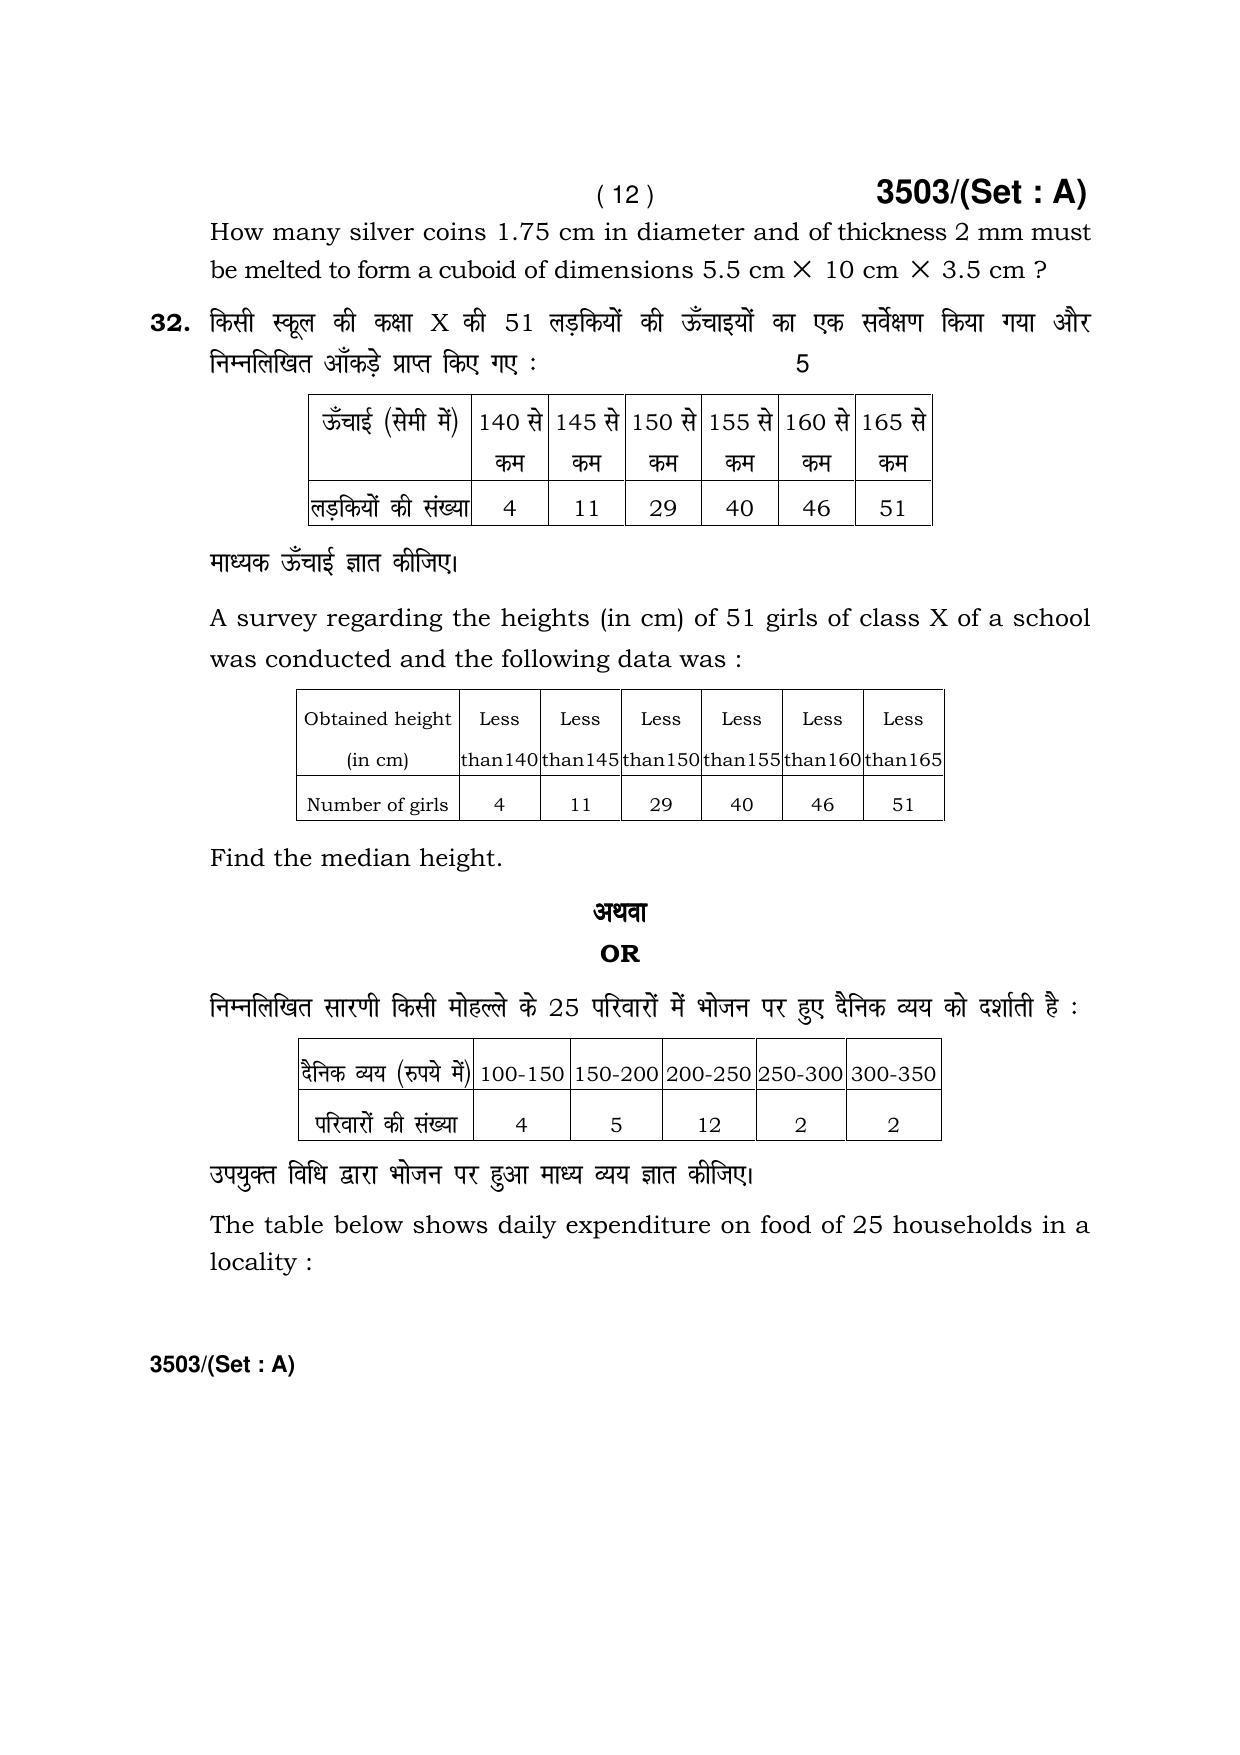 Haryana Board HBSE Class 10 Mathematics -A 2018 Question Paper - Page 12